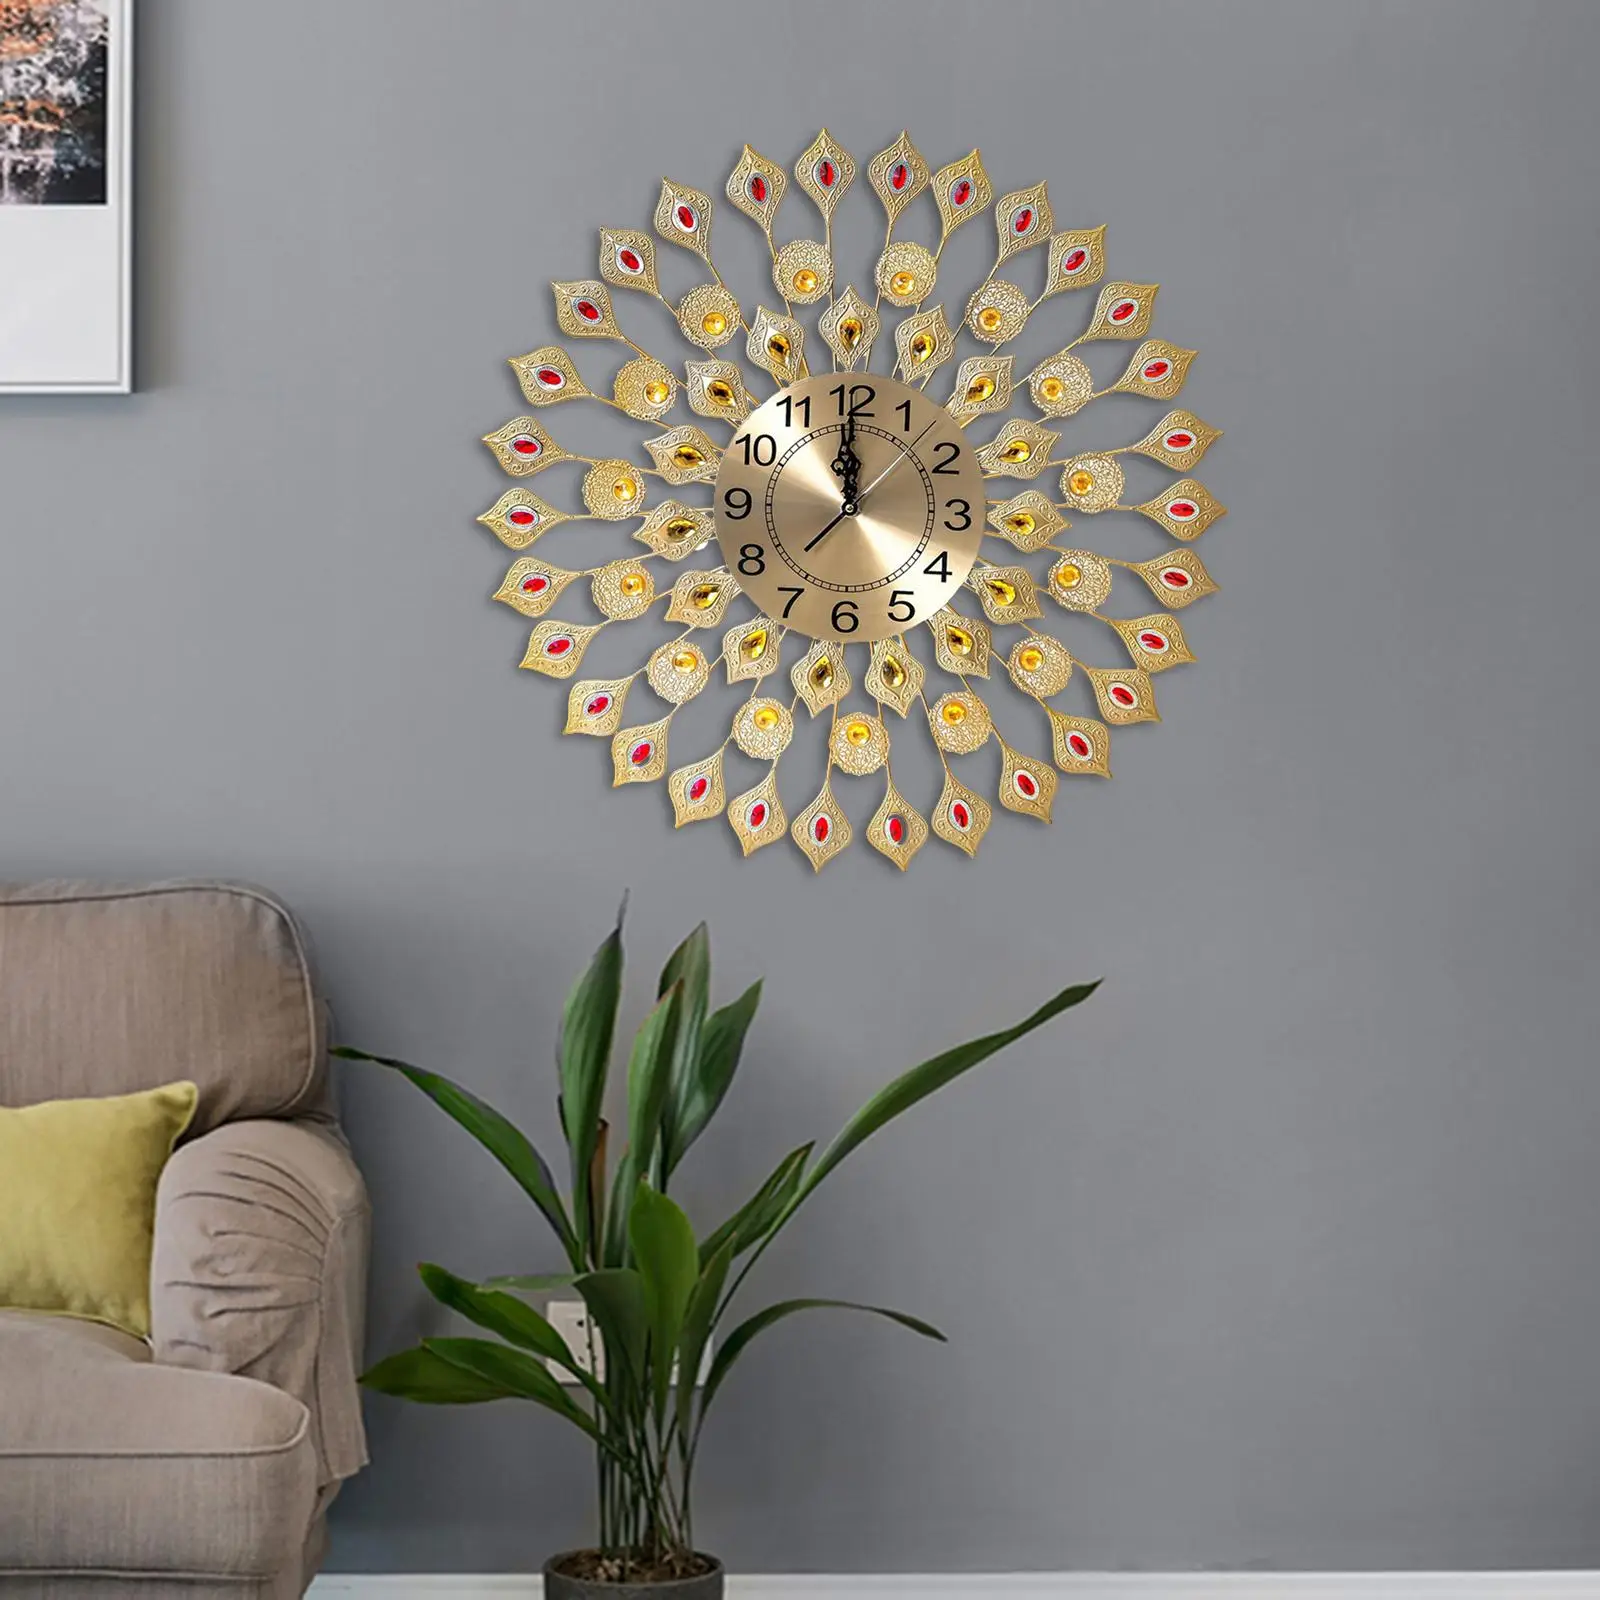 Large Peacock Wall Clock Non Ticking Big Wall Clock for Bedroom Office Decor